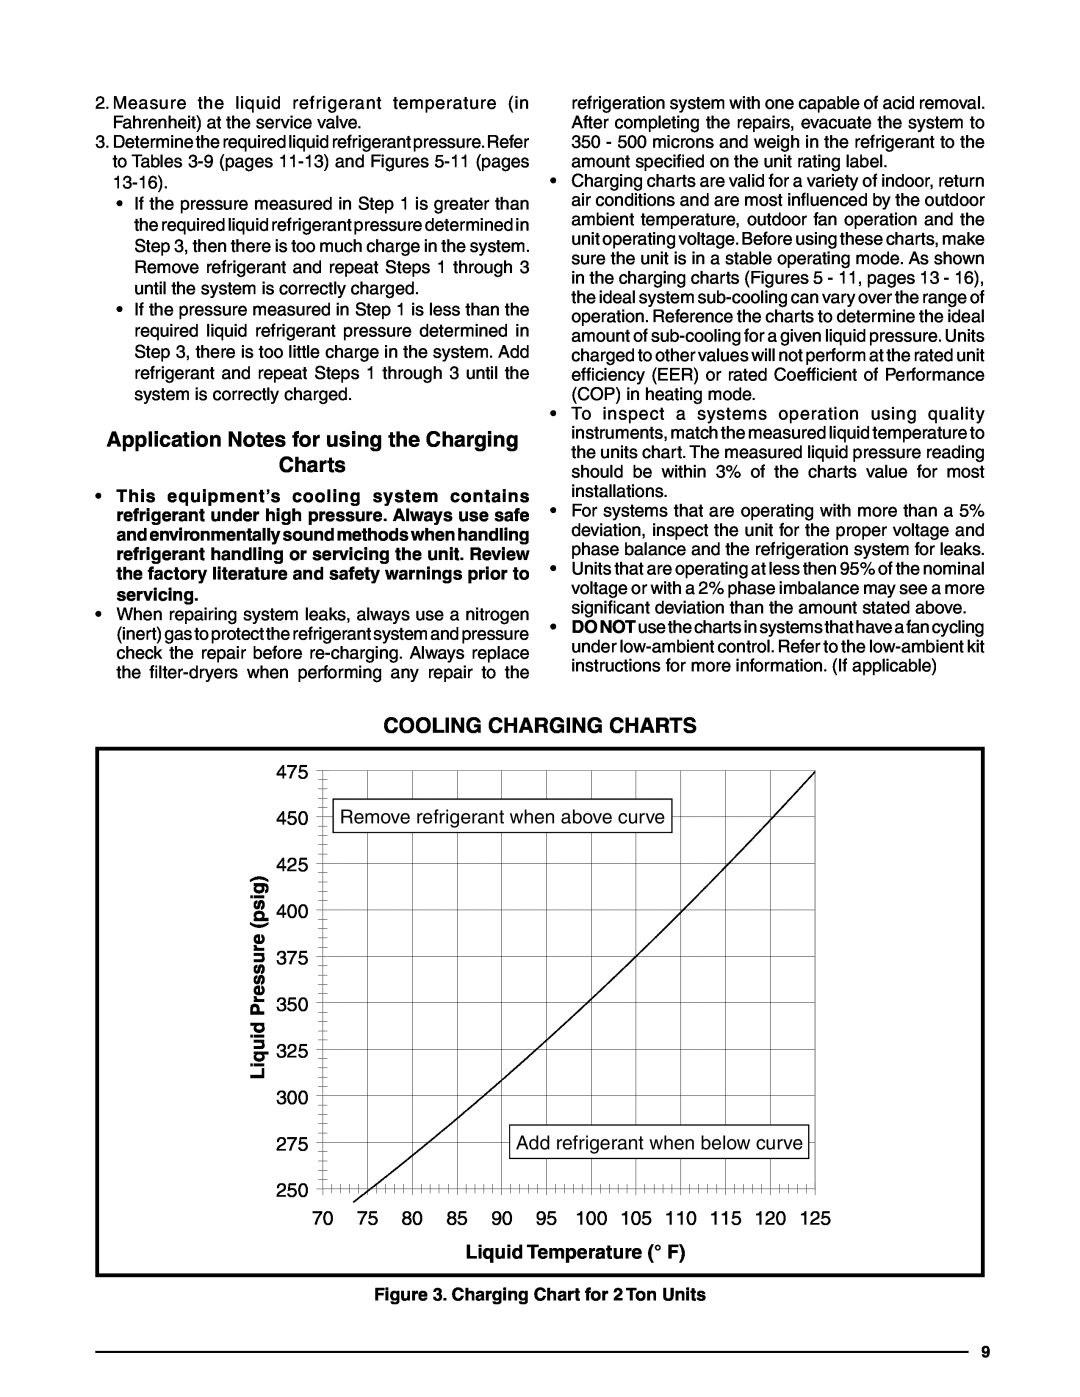 Heat Controller R-410A installation instructions Application Notes for using the Charging Charts, Cooling Charging Charts 